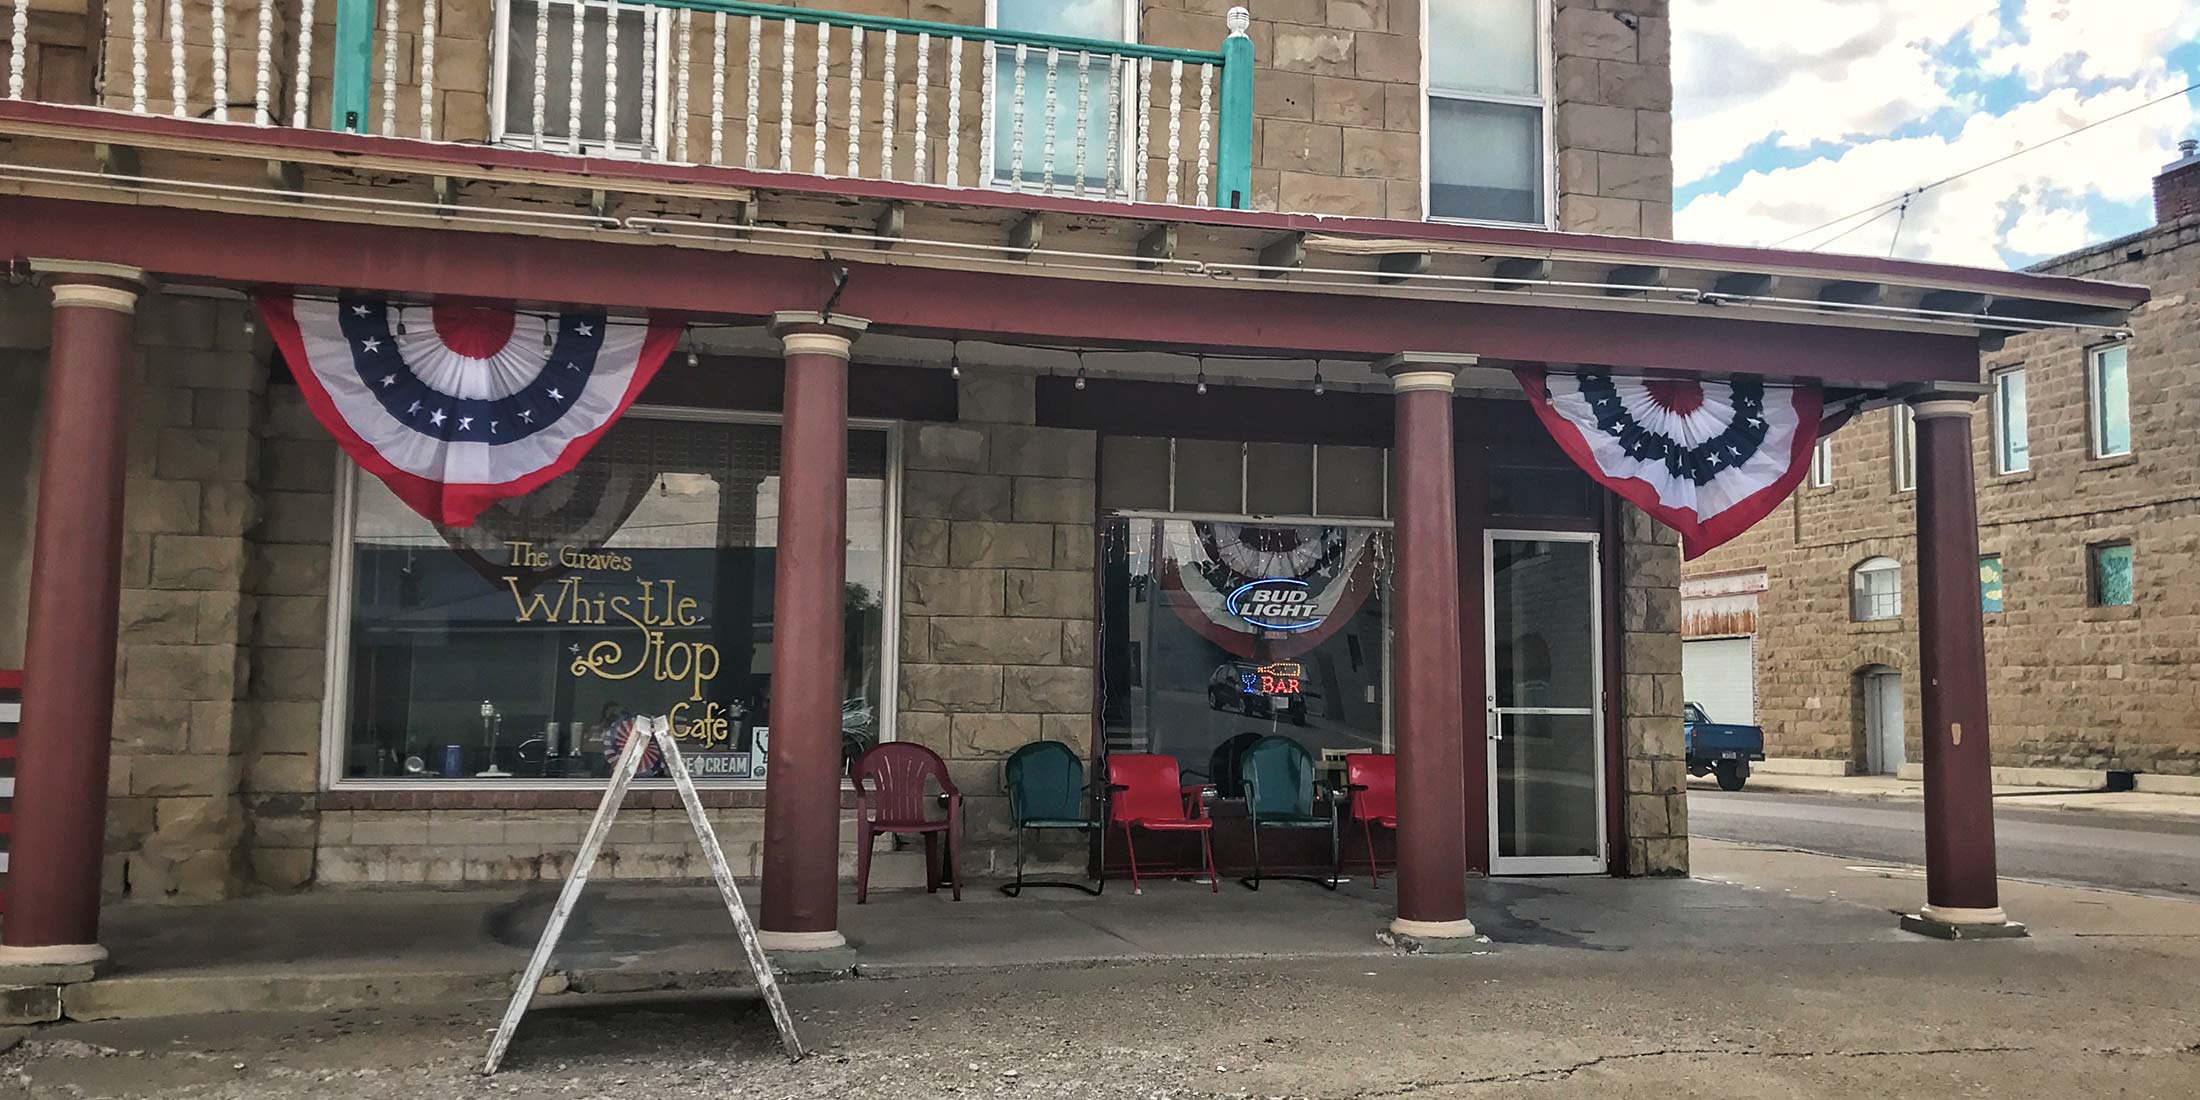 The Graves Whistle Stop Cafe is locally owned and located inside the historic Graves Hotel in Harlowton, Montana on Highway 12 in Wheatland County.